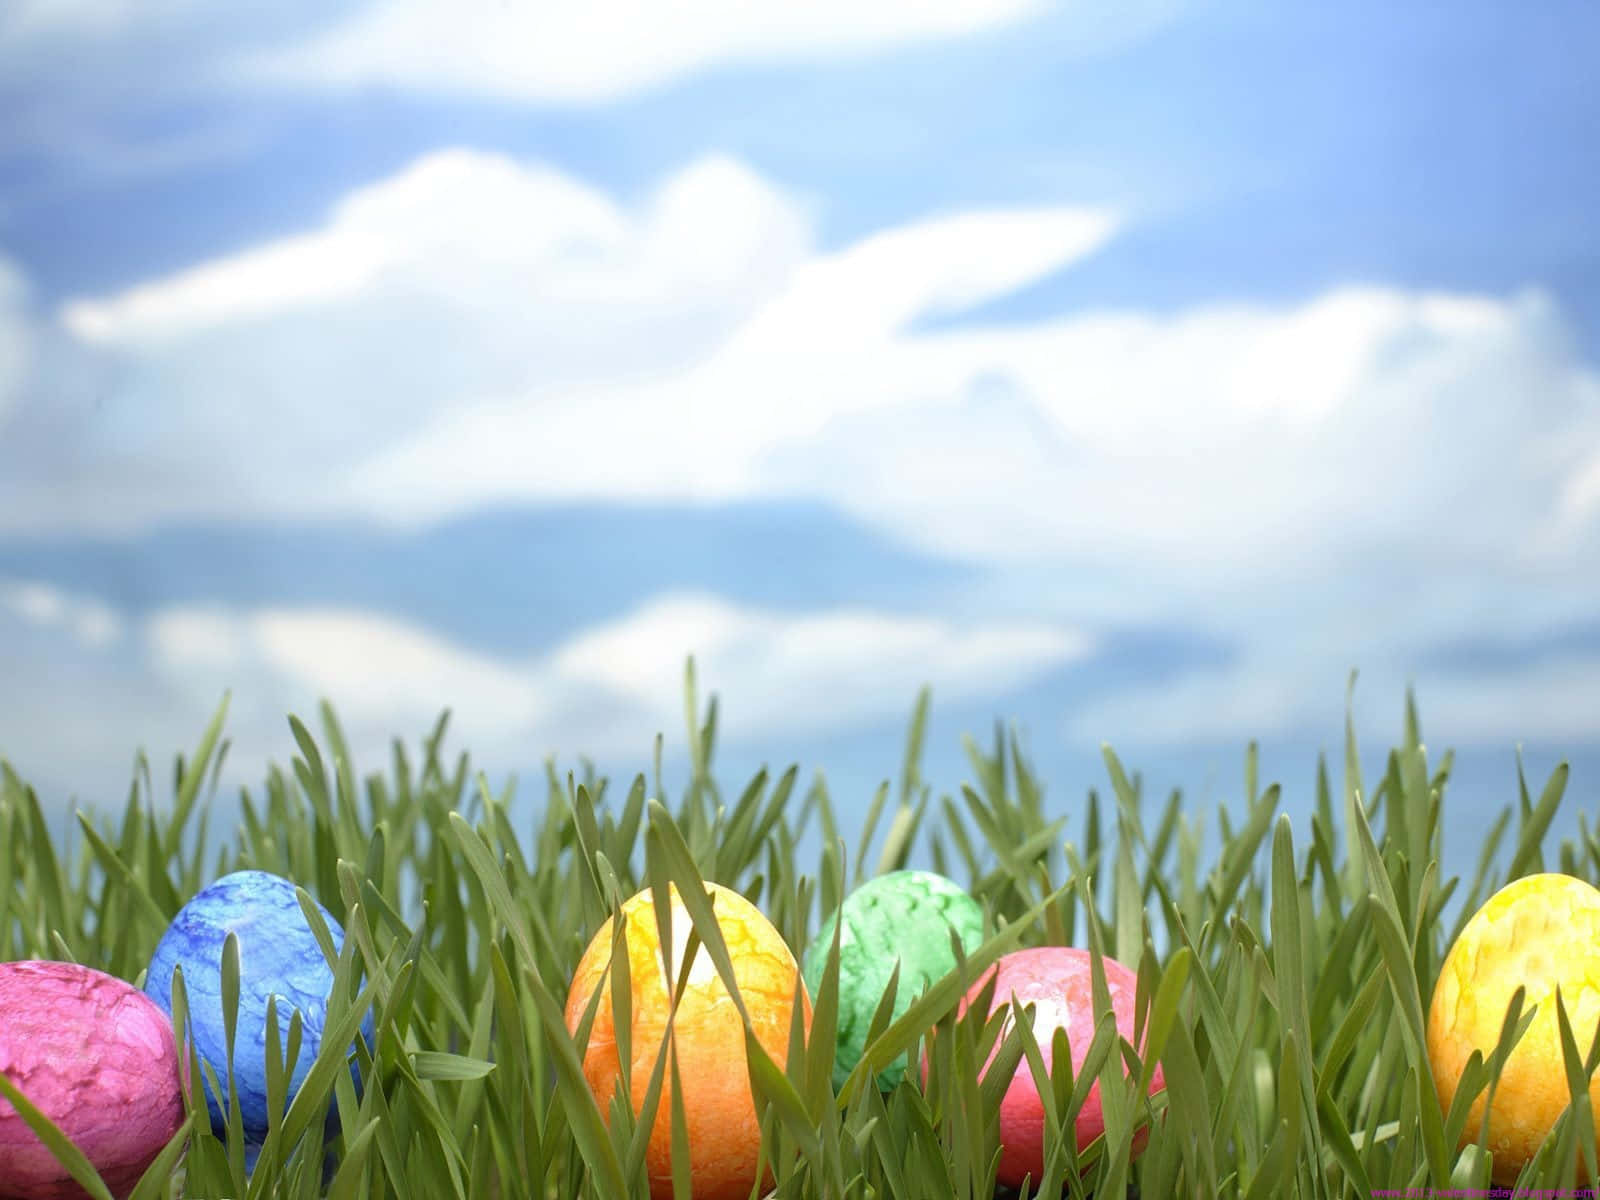 Celebrate Easter with a fun-filled day!